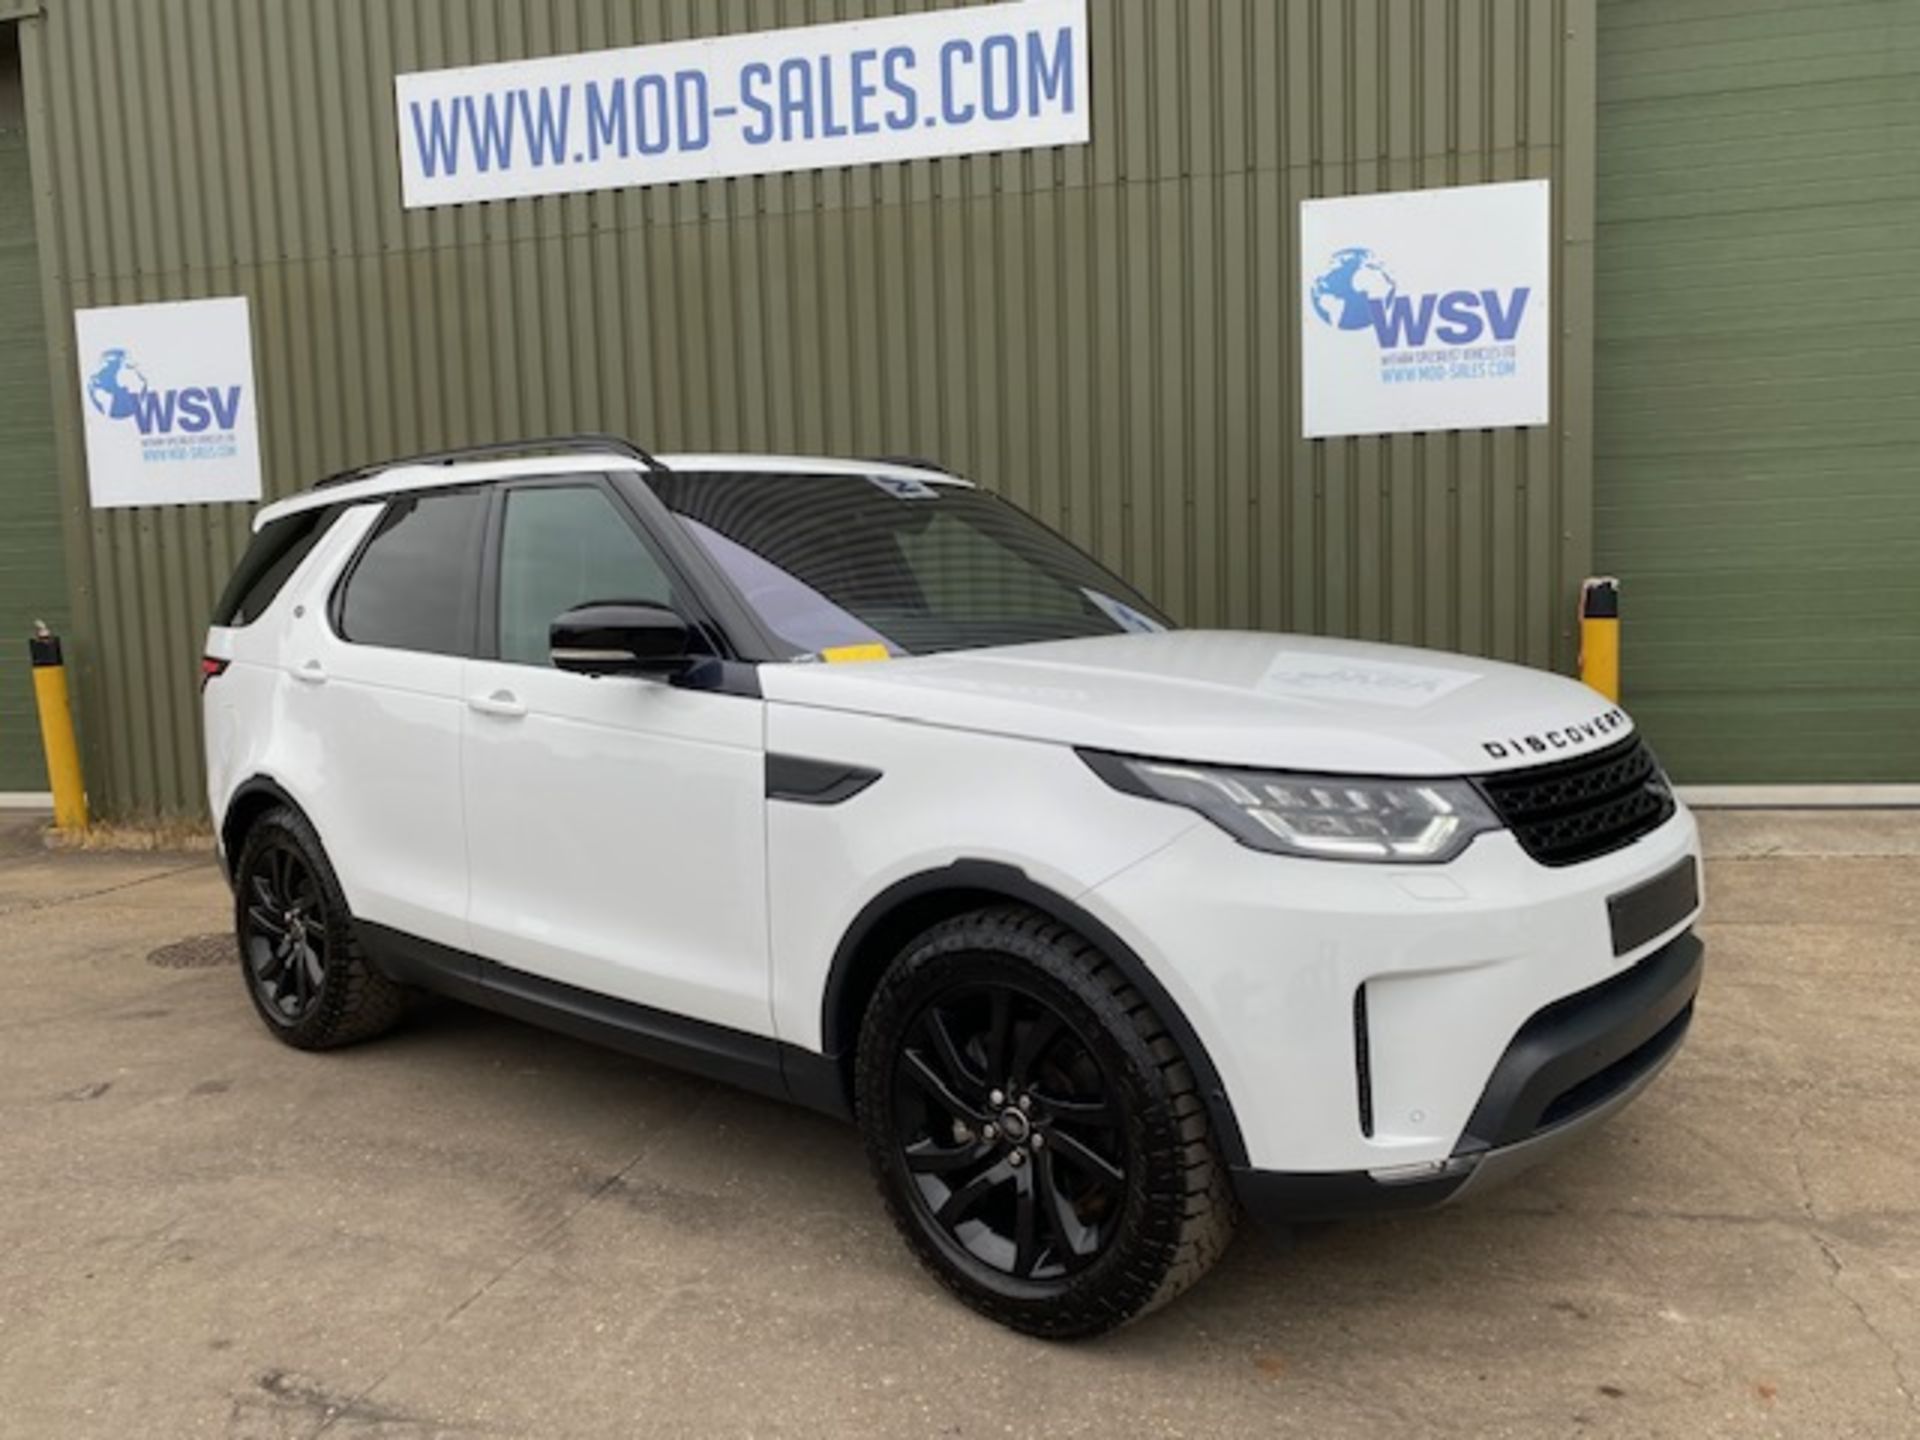 2019 model year Land Rover Discovery 5 3.0 TDV6 HSE Luxury RHD ONLY 5778 MILES!